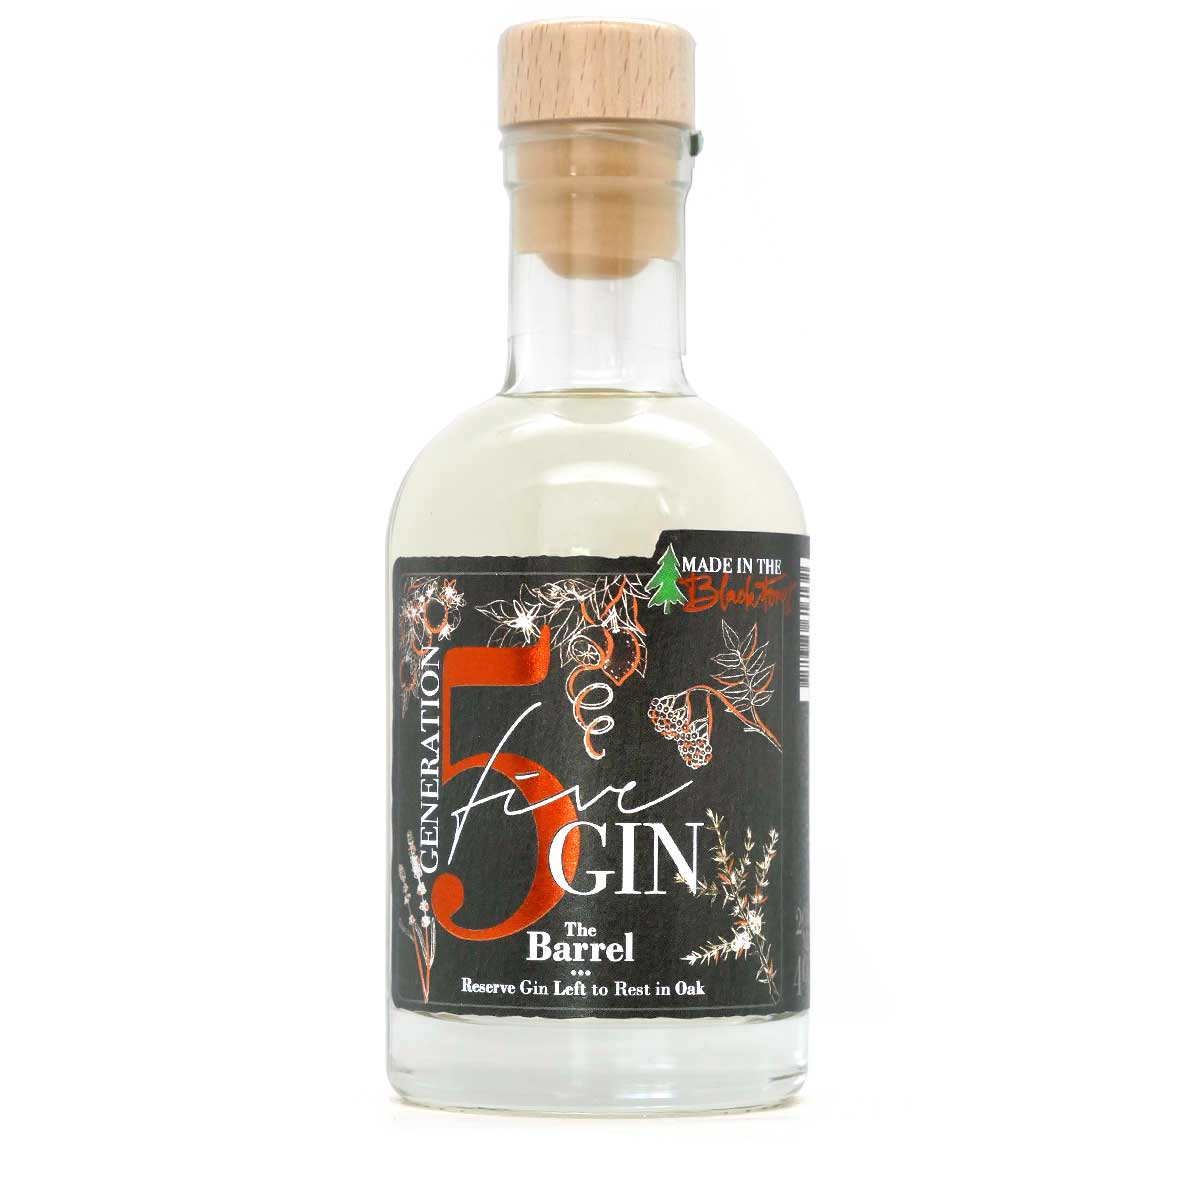 - PANAMA Black SELECT Gin 5 Generation Forest Gin